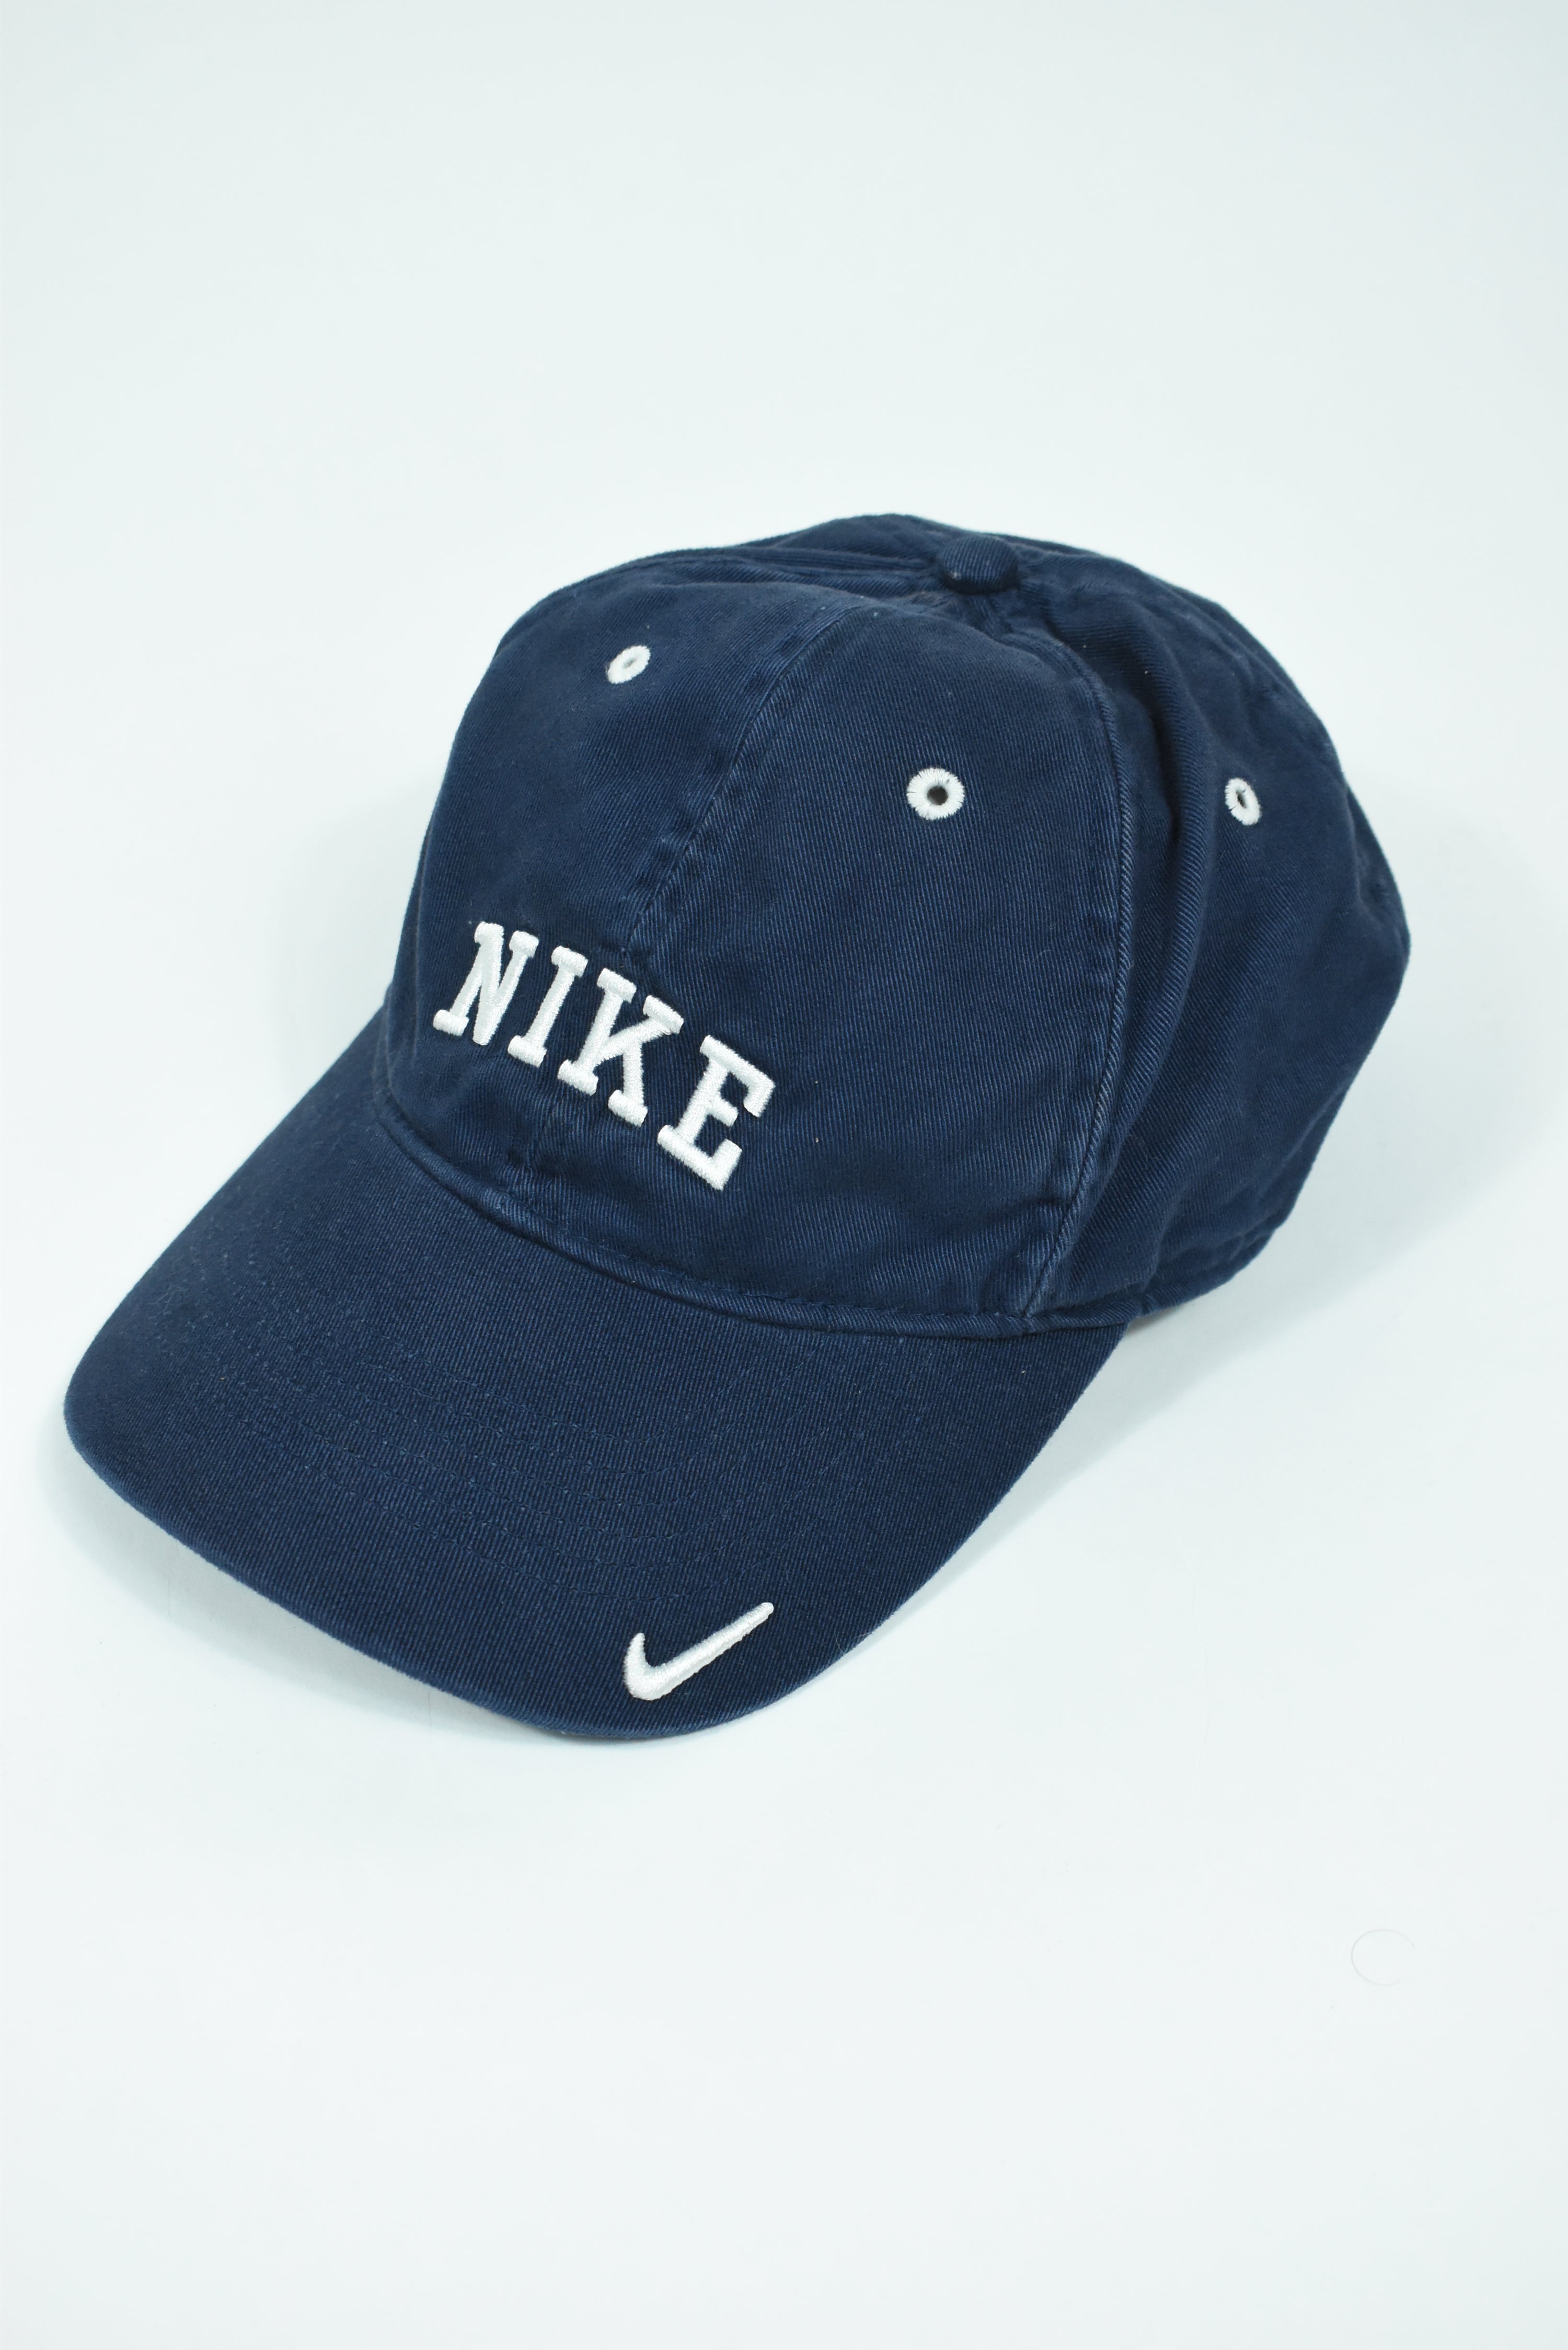 Vintage Nike Navy Embroidery Spellout Cap OS